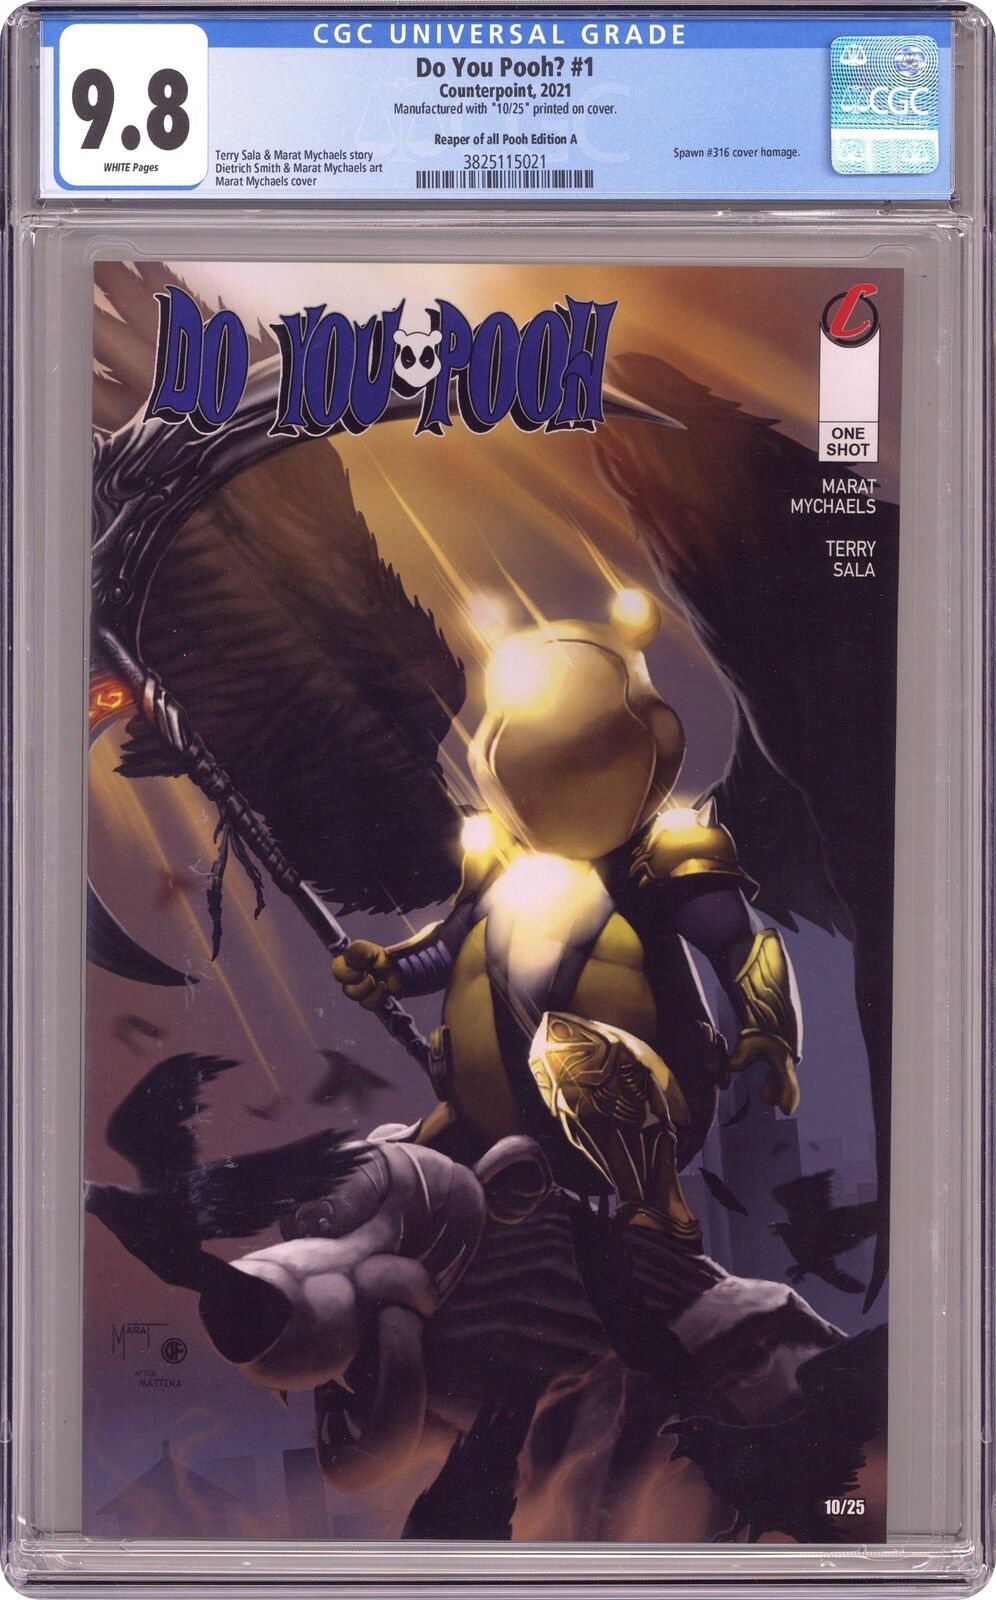 Do You Pooh? 1REAPER.A CGC 9.8 2021 3825115021